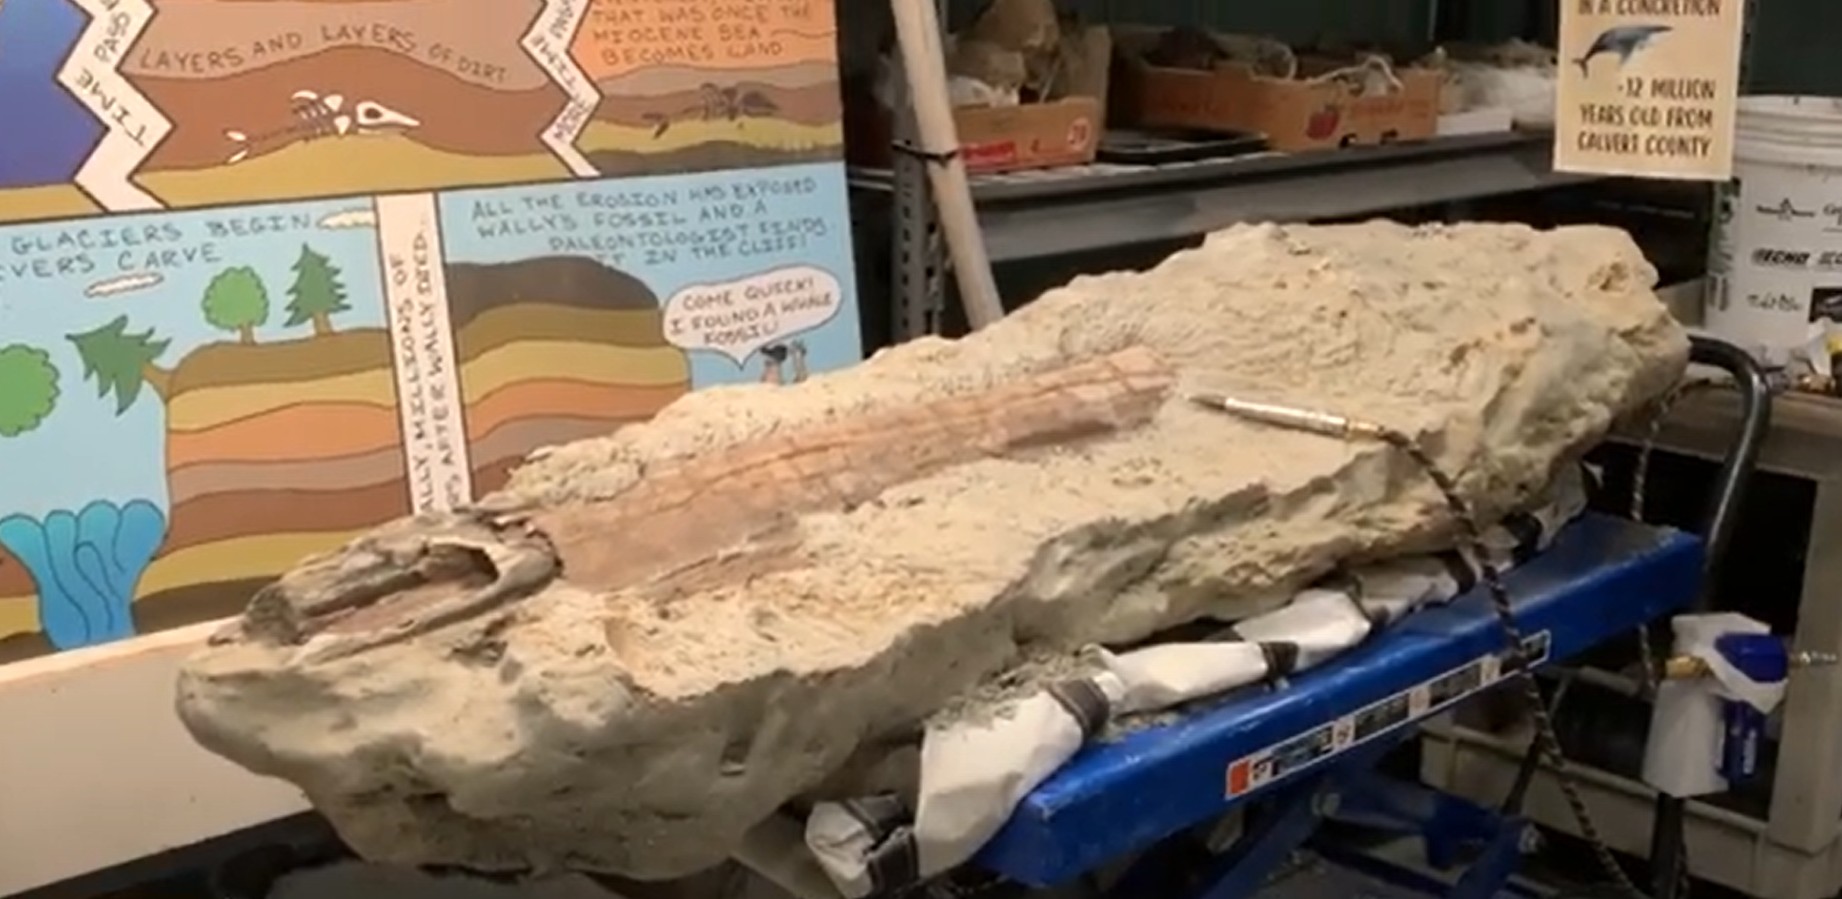 VIDEO: How to Make Your Own Fossil Discoveries on the Bay